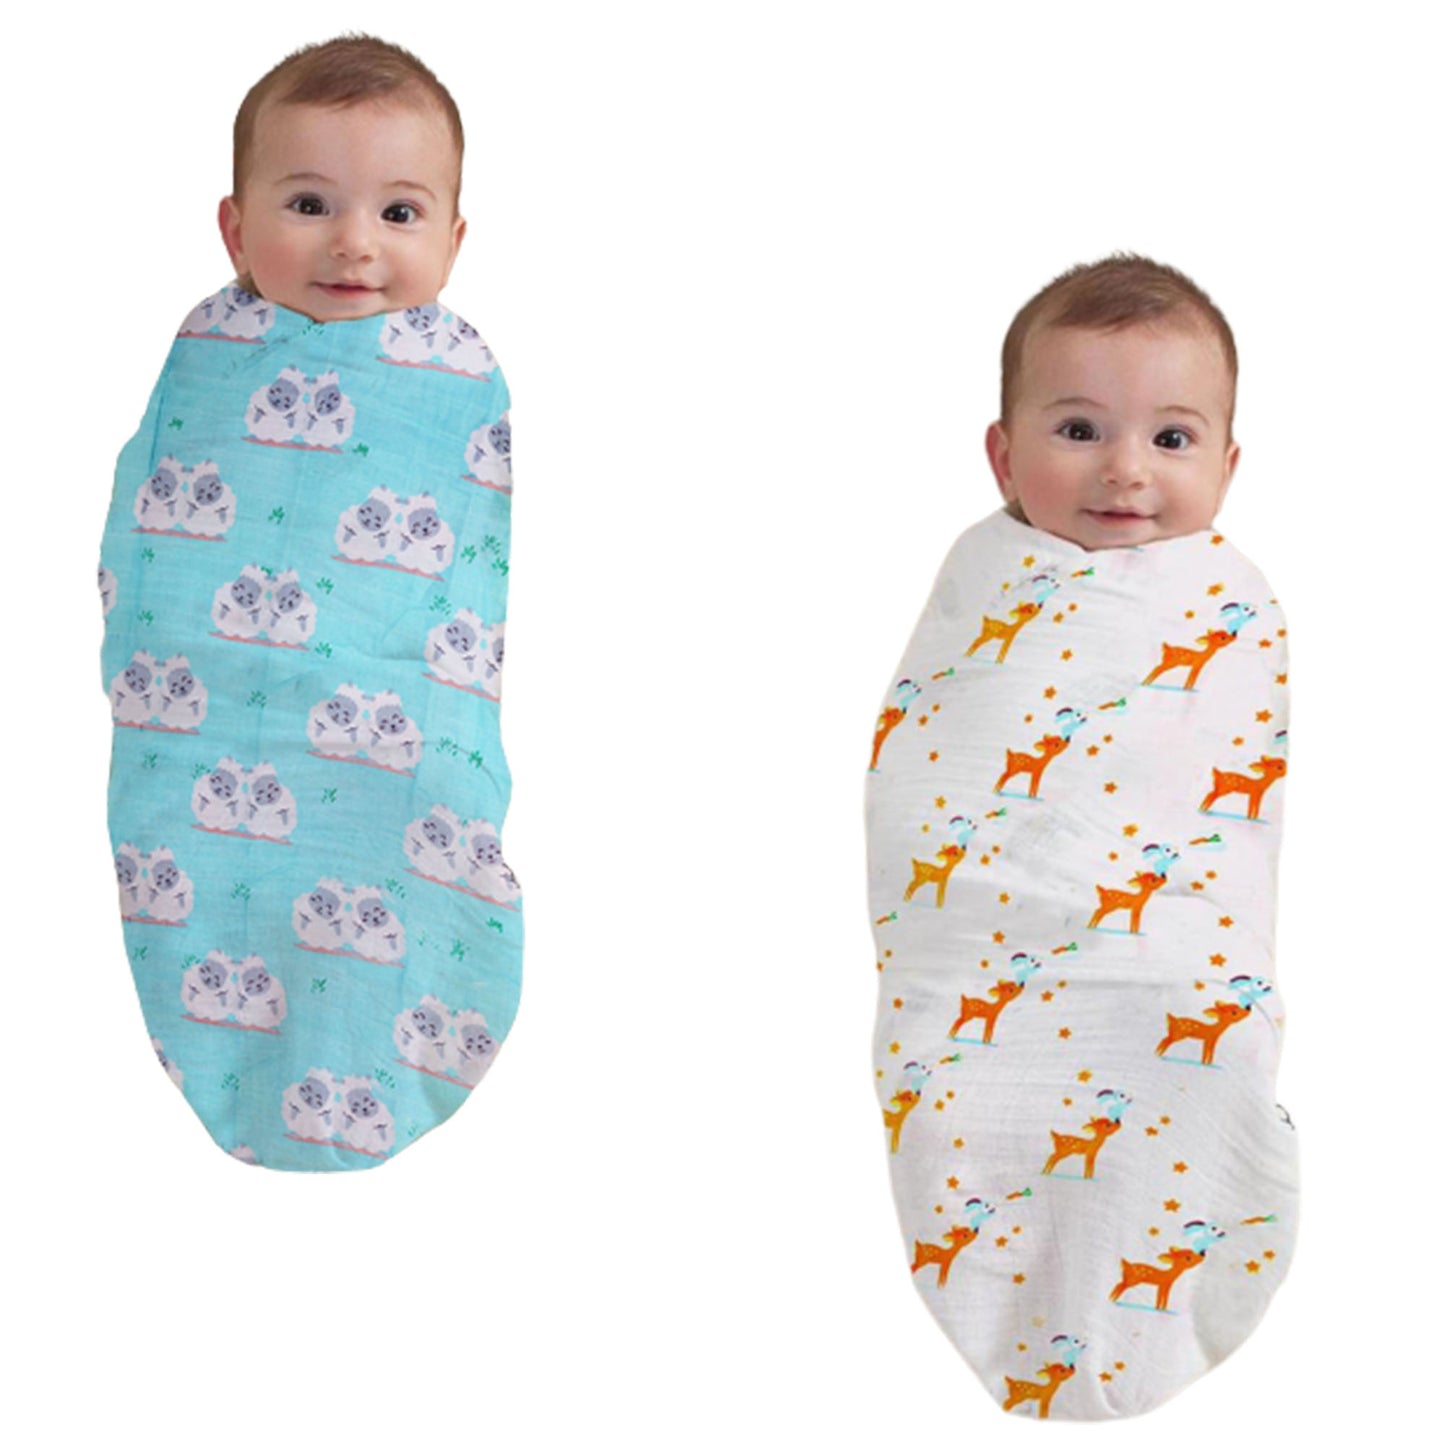 Polka Tots Organic Cotton Swaddle Wrap Sheep & Deer Design Large Size 120 x 120 CM (Pack of 2)